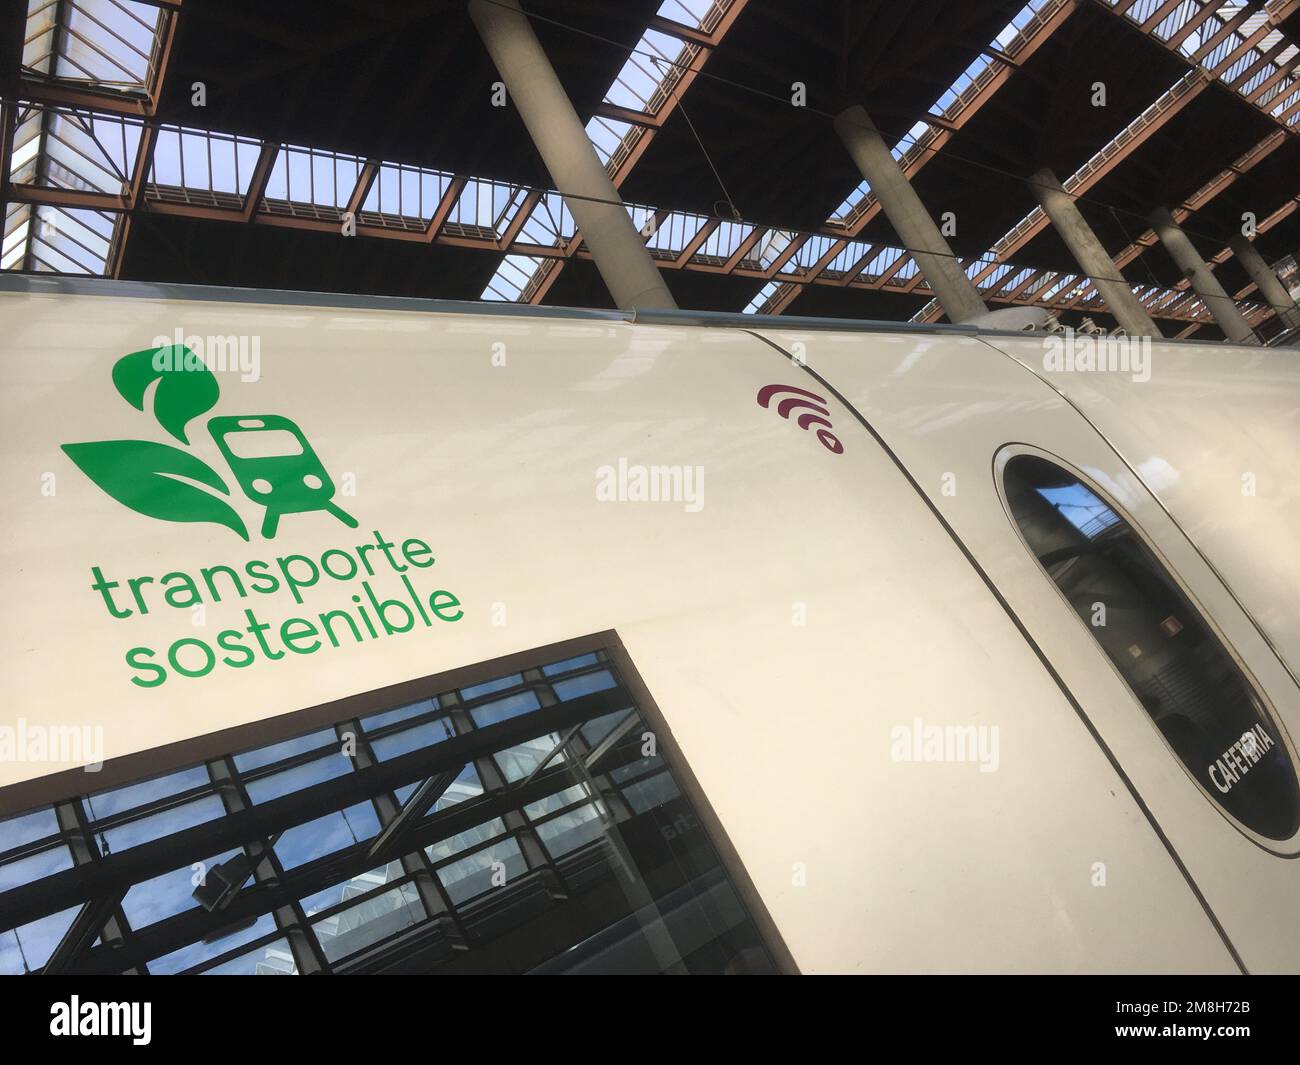 Sustainable transport logo on a high speed train in Spain Stock Photo